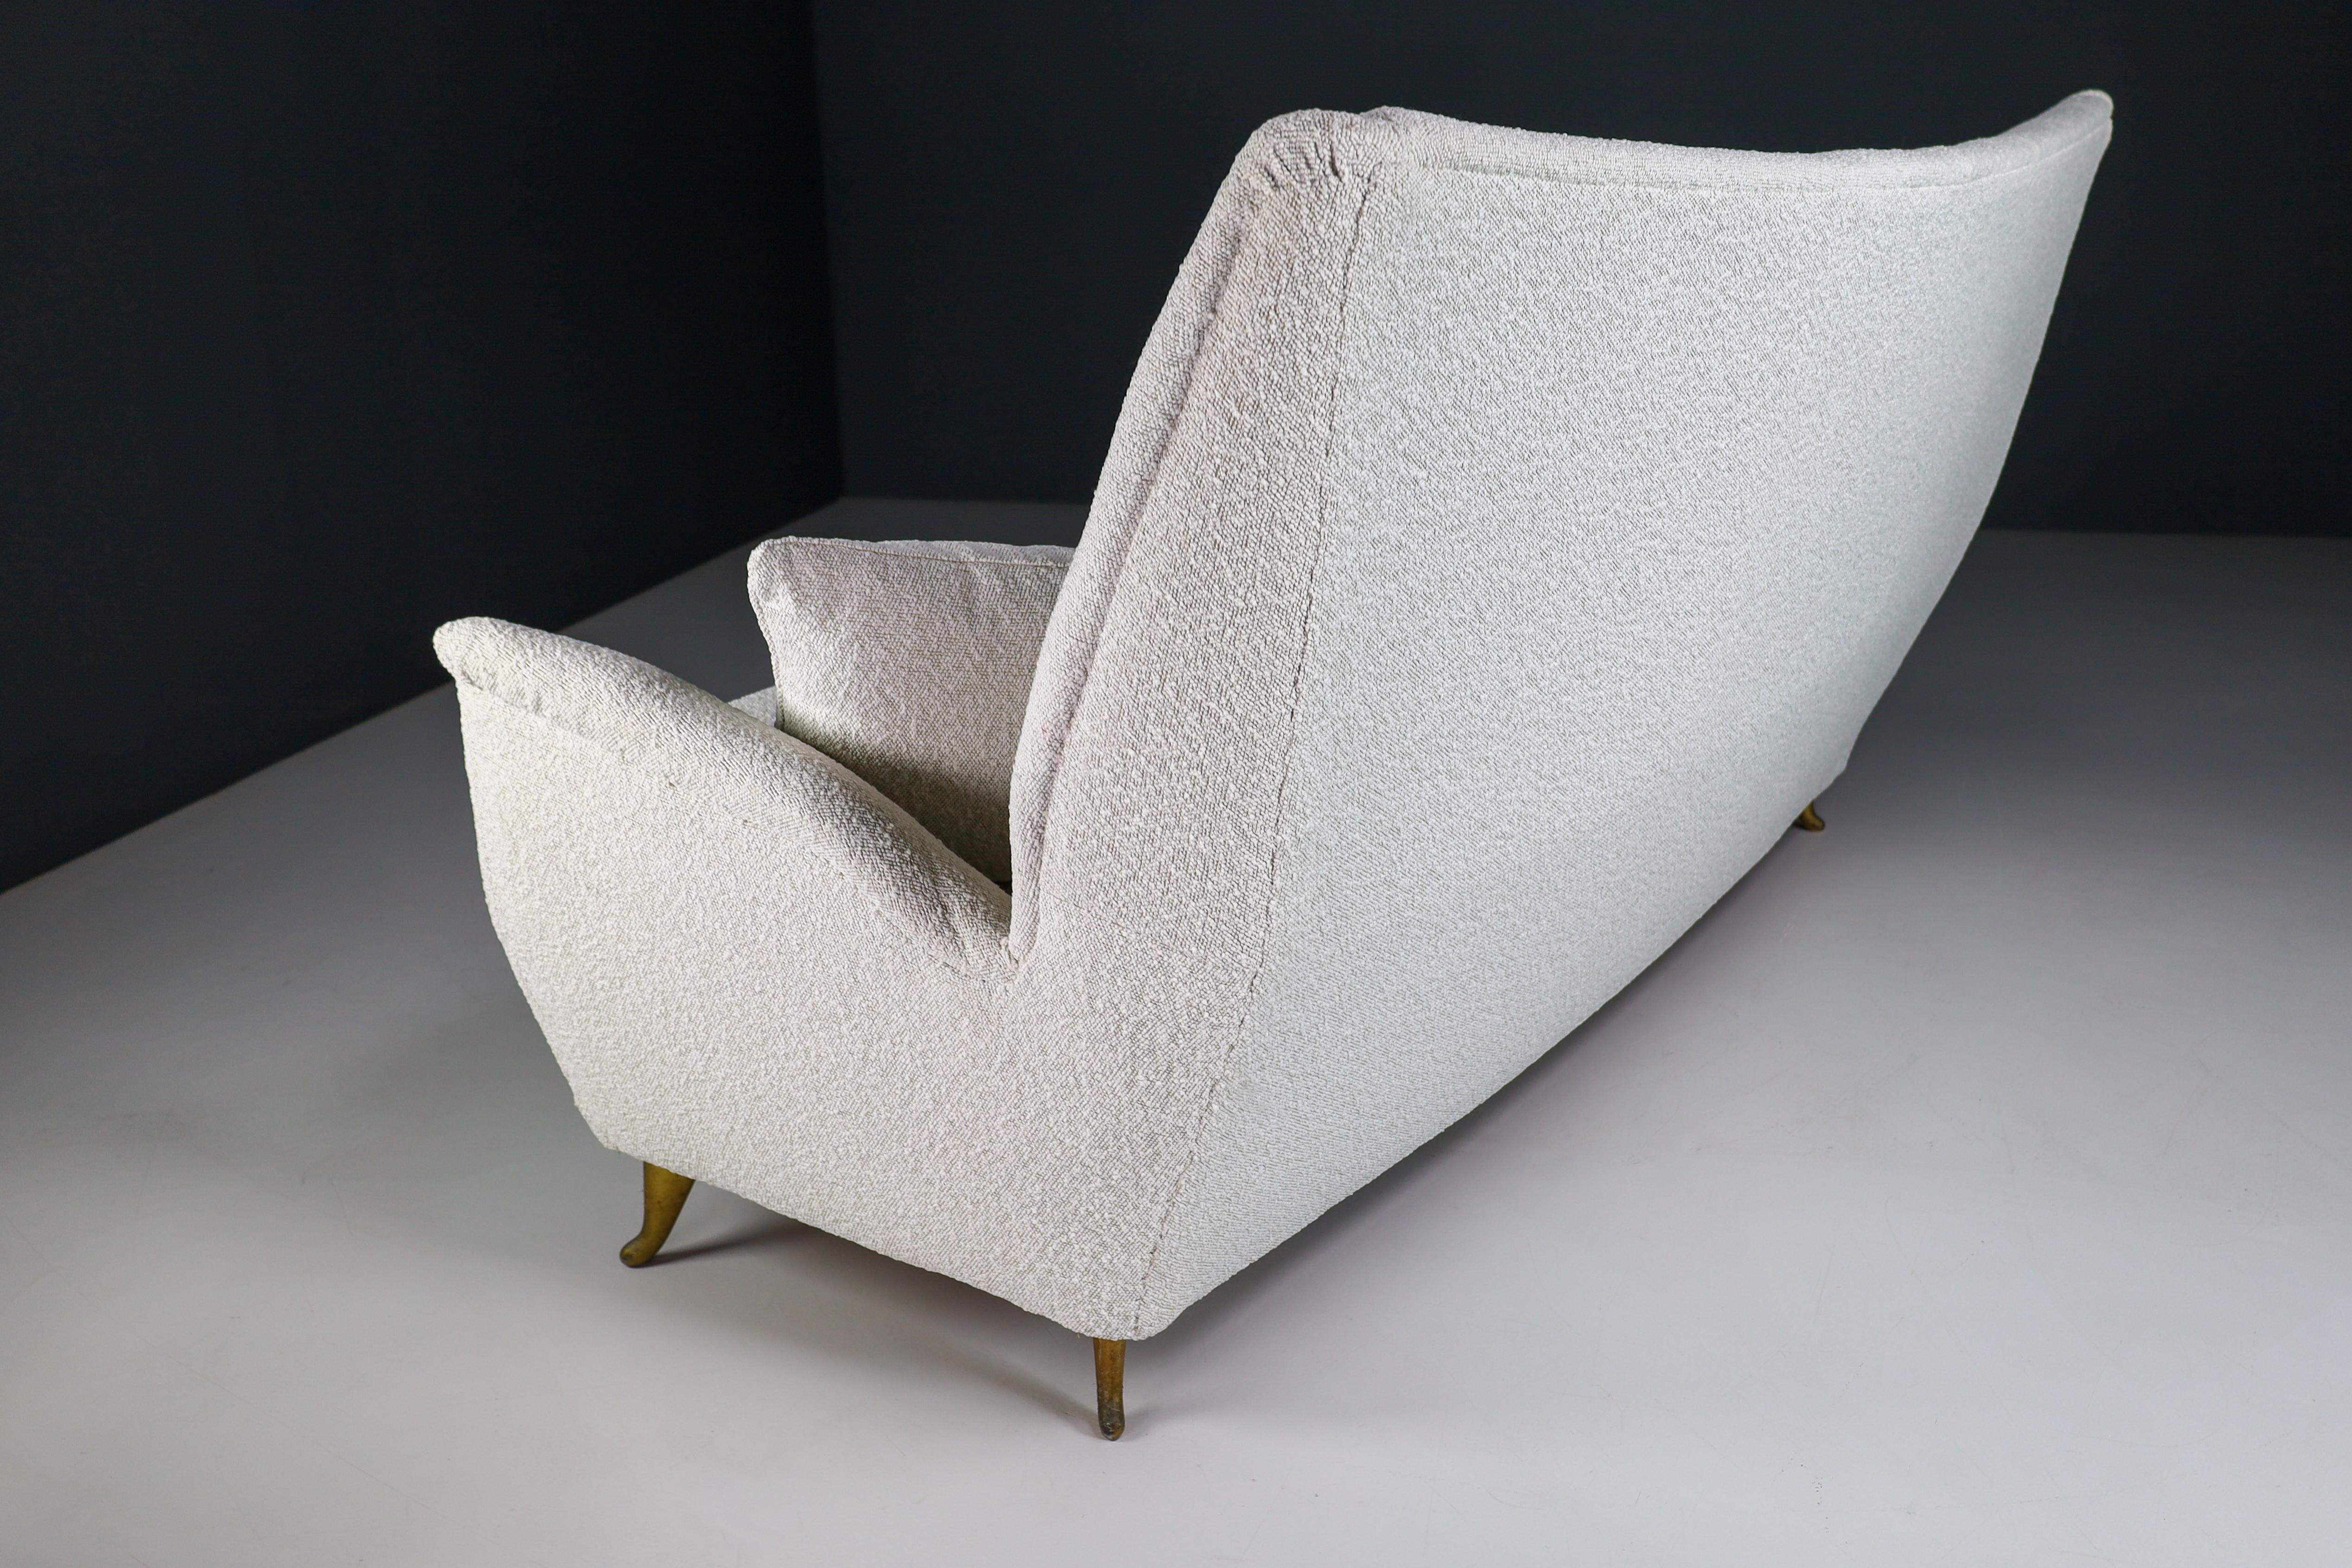 High Back Sofa By Gio Ponti For ISA Bergamo in Bouclé Fabric Upholstery 1950s For Sale 7